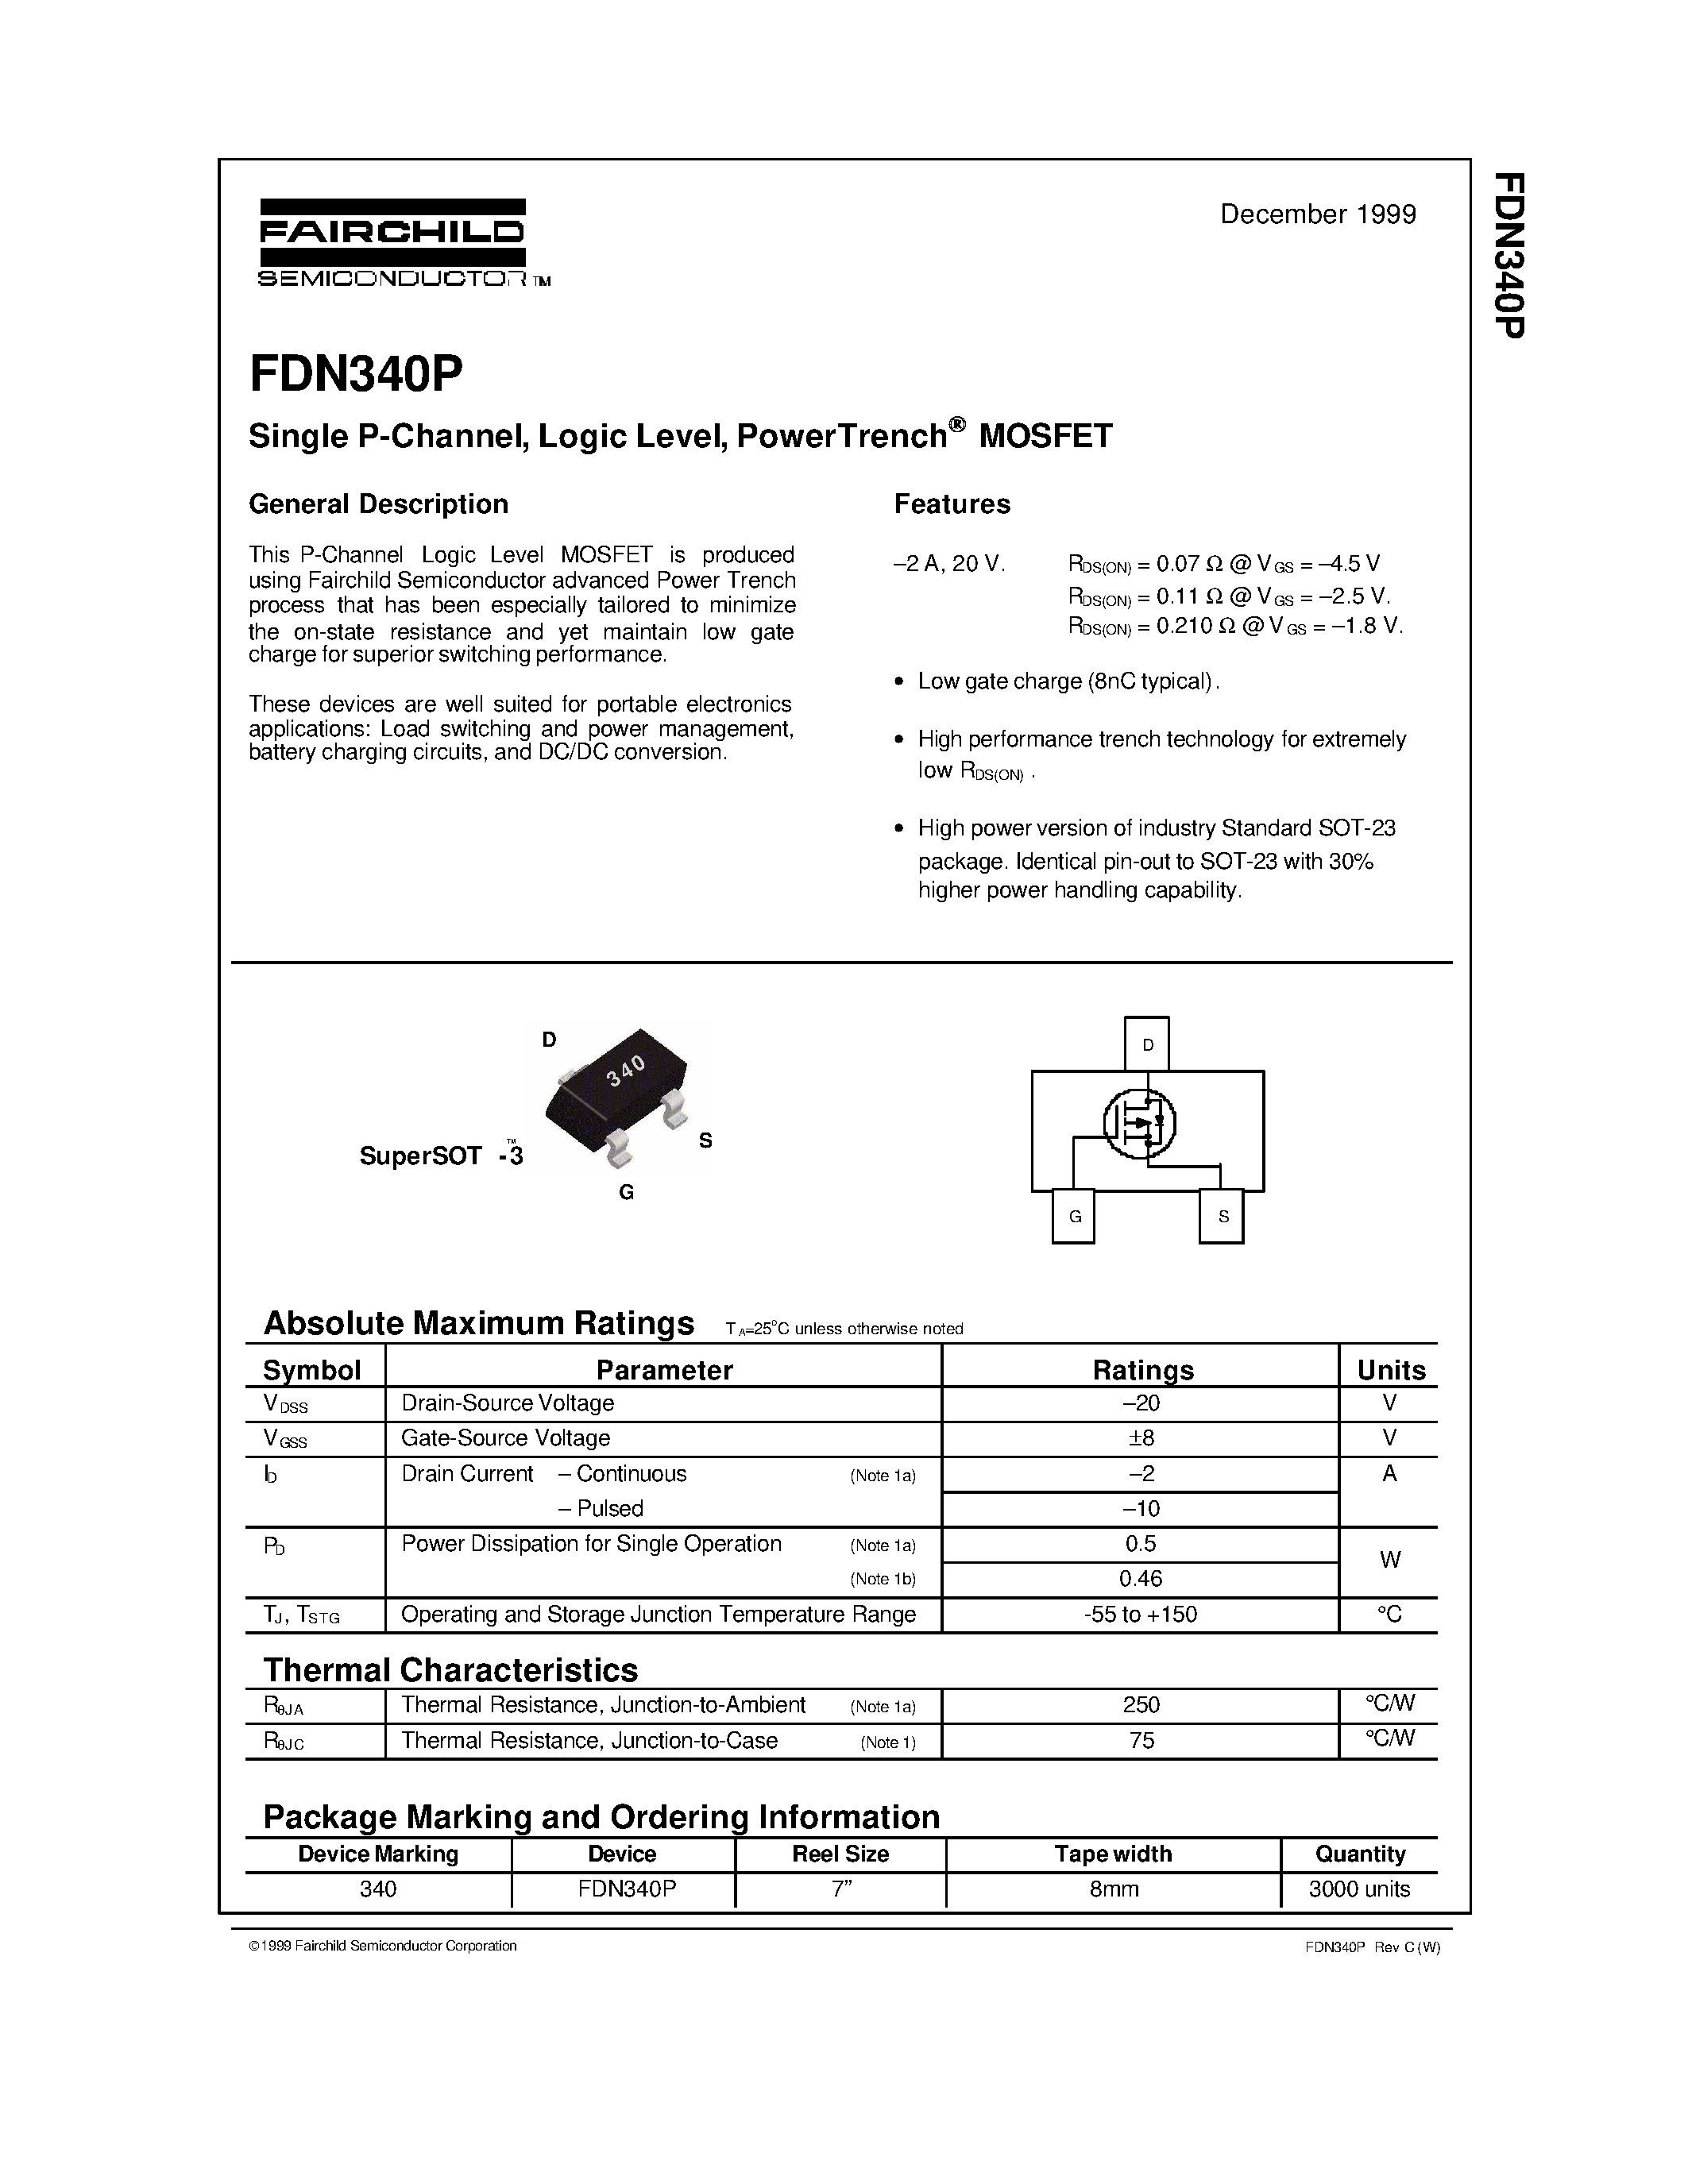 Datasheet FDN340P - Single P-Channel/ Logic Level/ PowerTrench MOSFET page 1